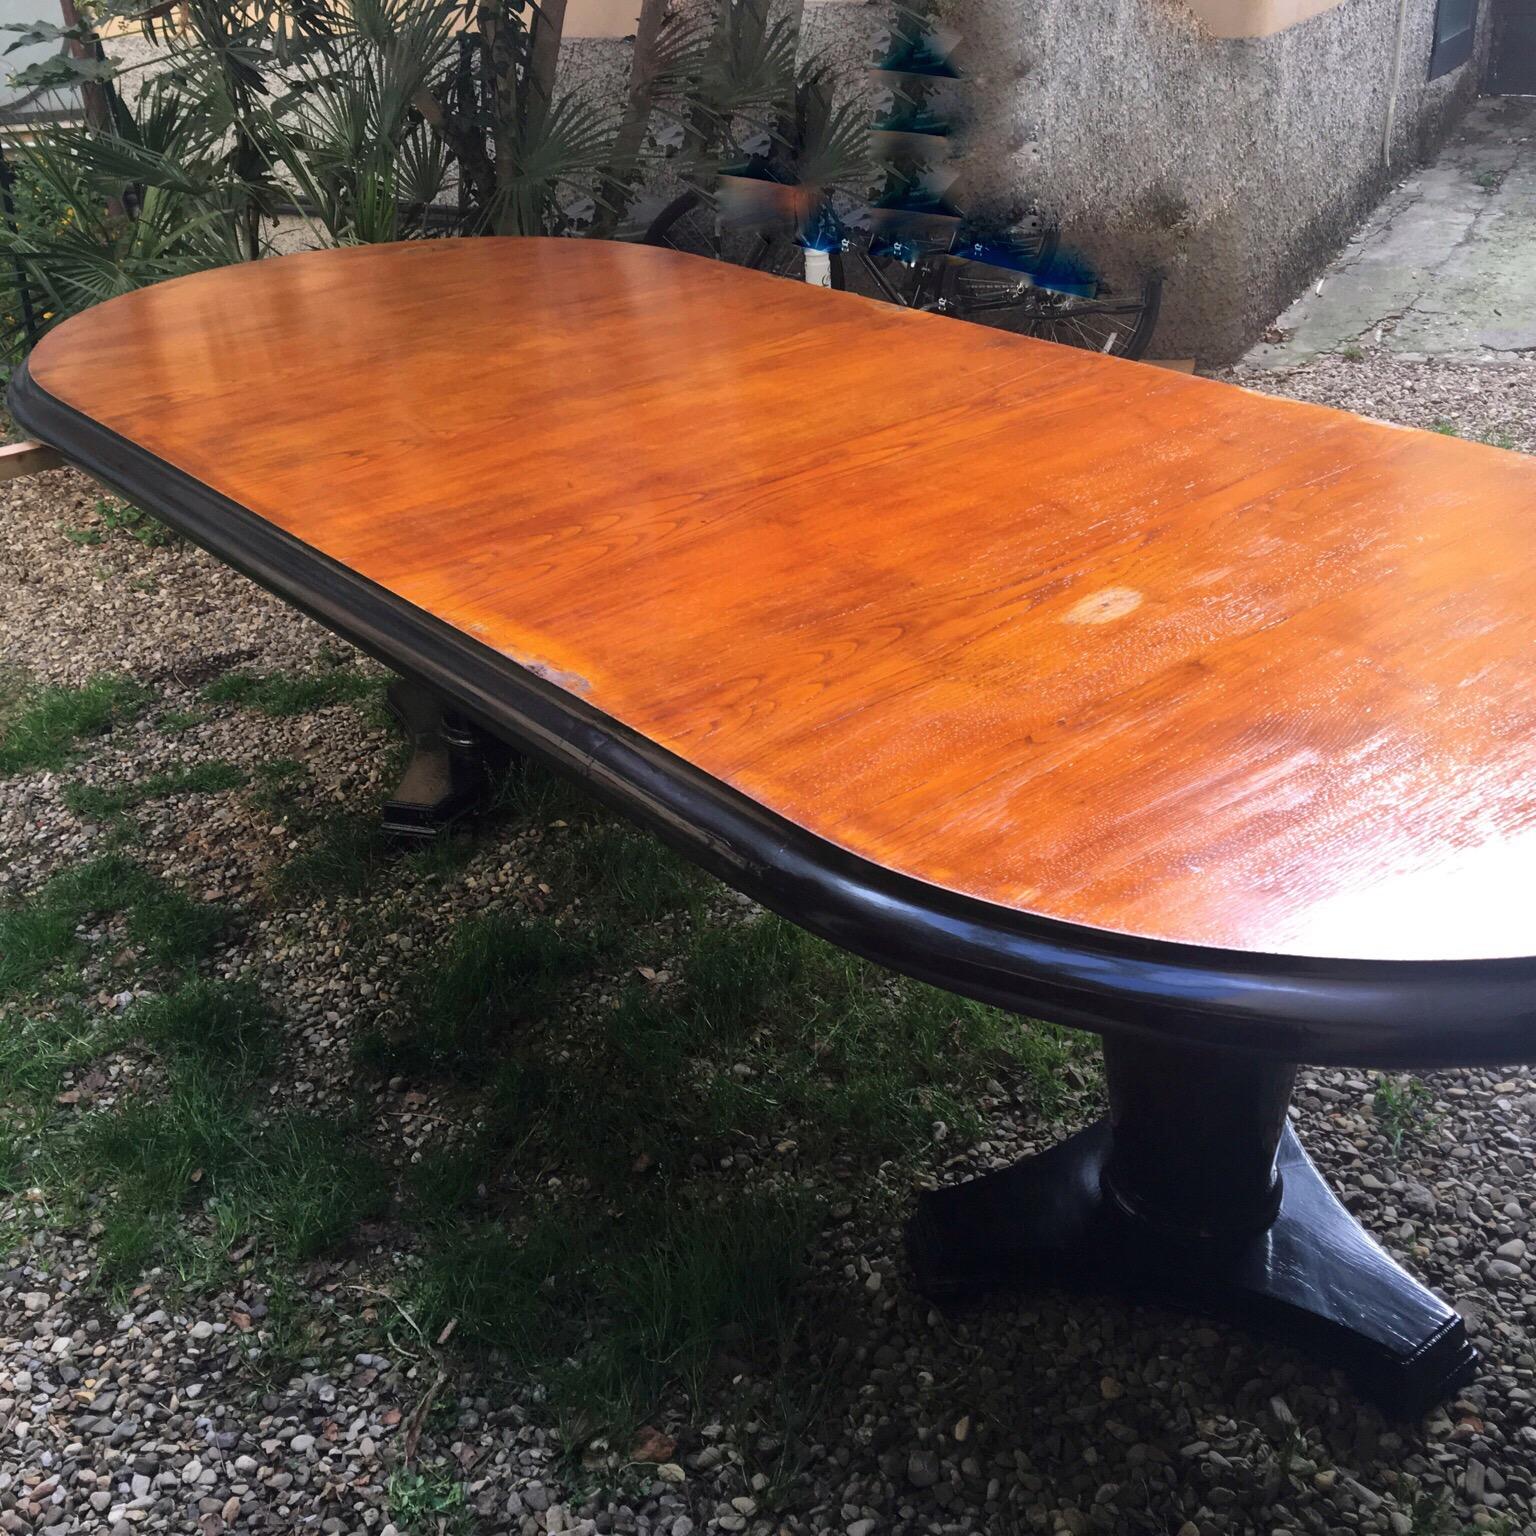 Mid-20th Century Art Deco Oval Dining Table in Mahogany Wood with Black Ebonized Edge, 1940s For Sale